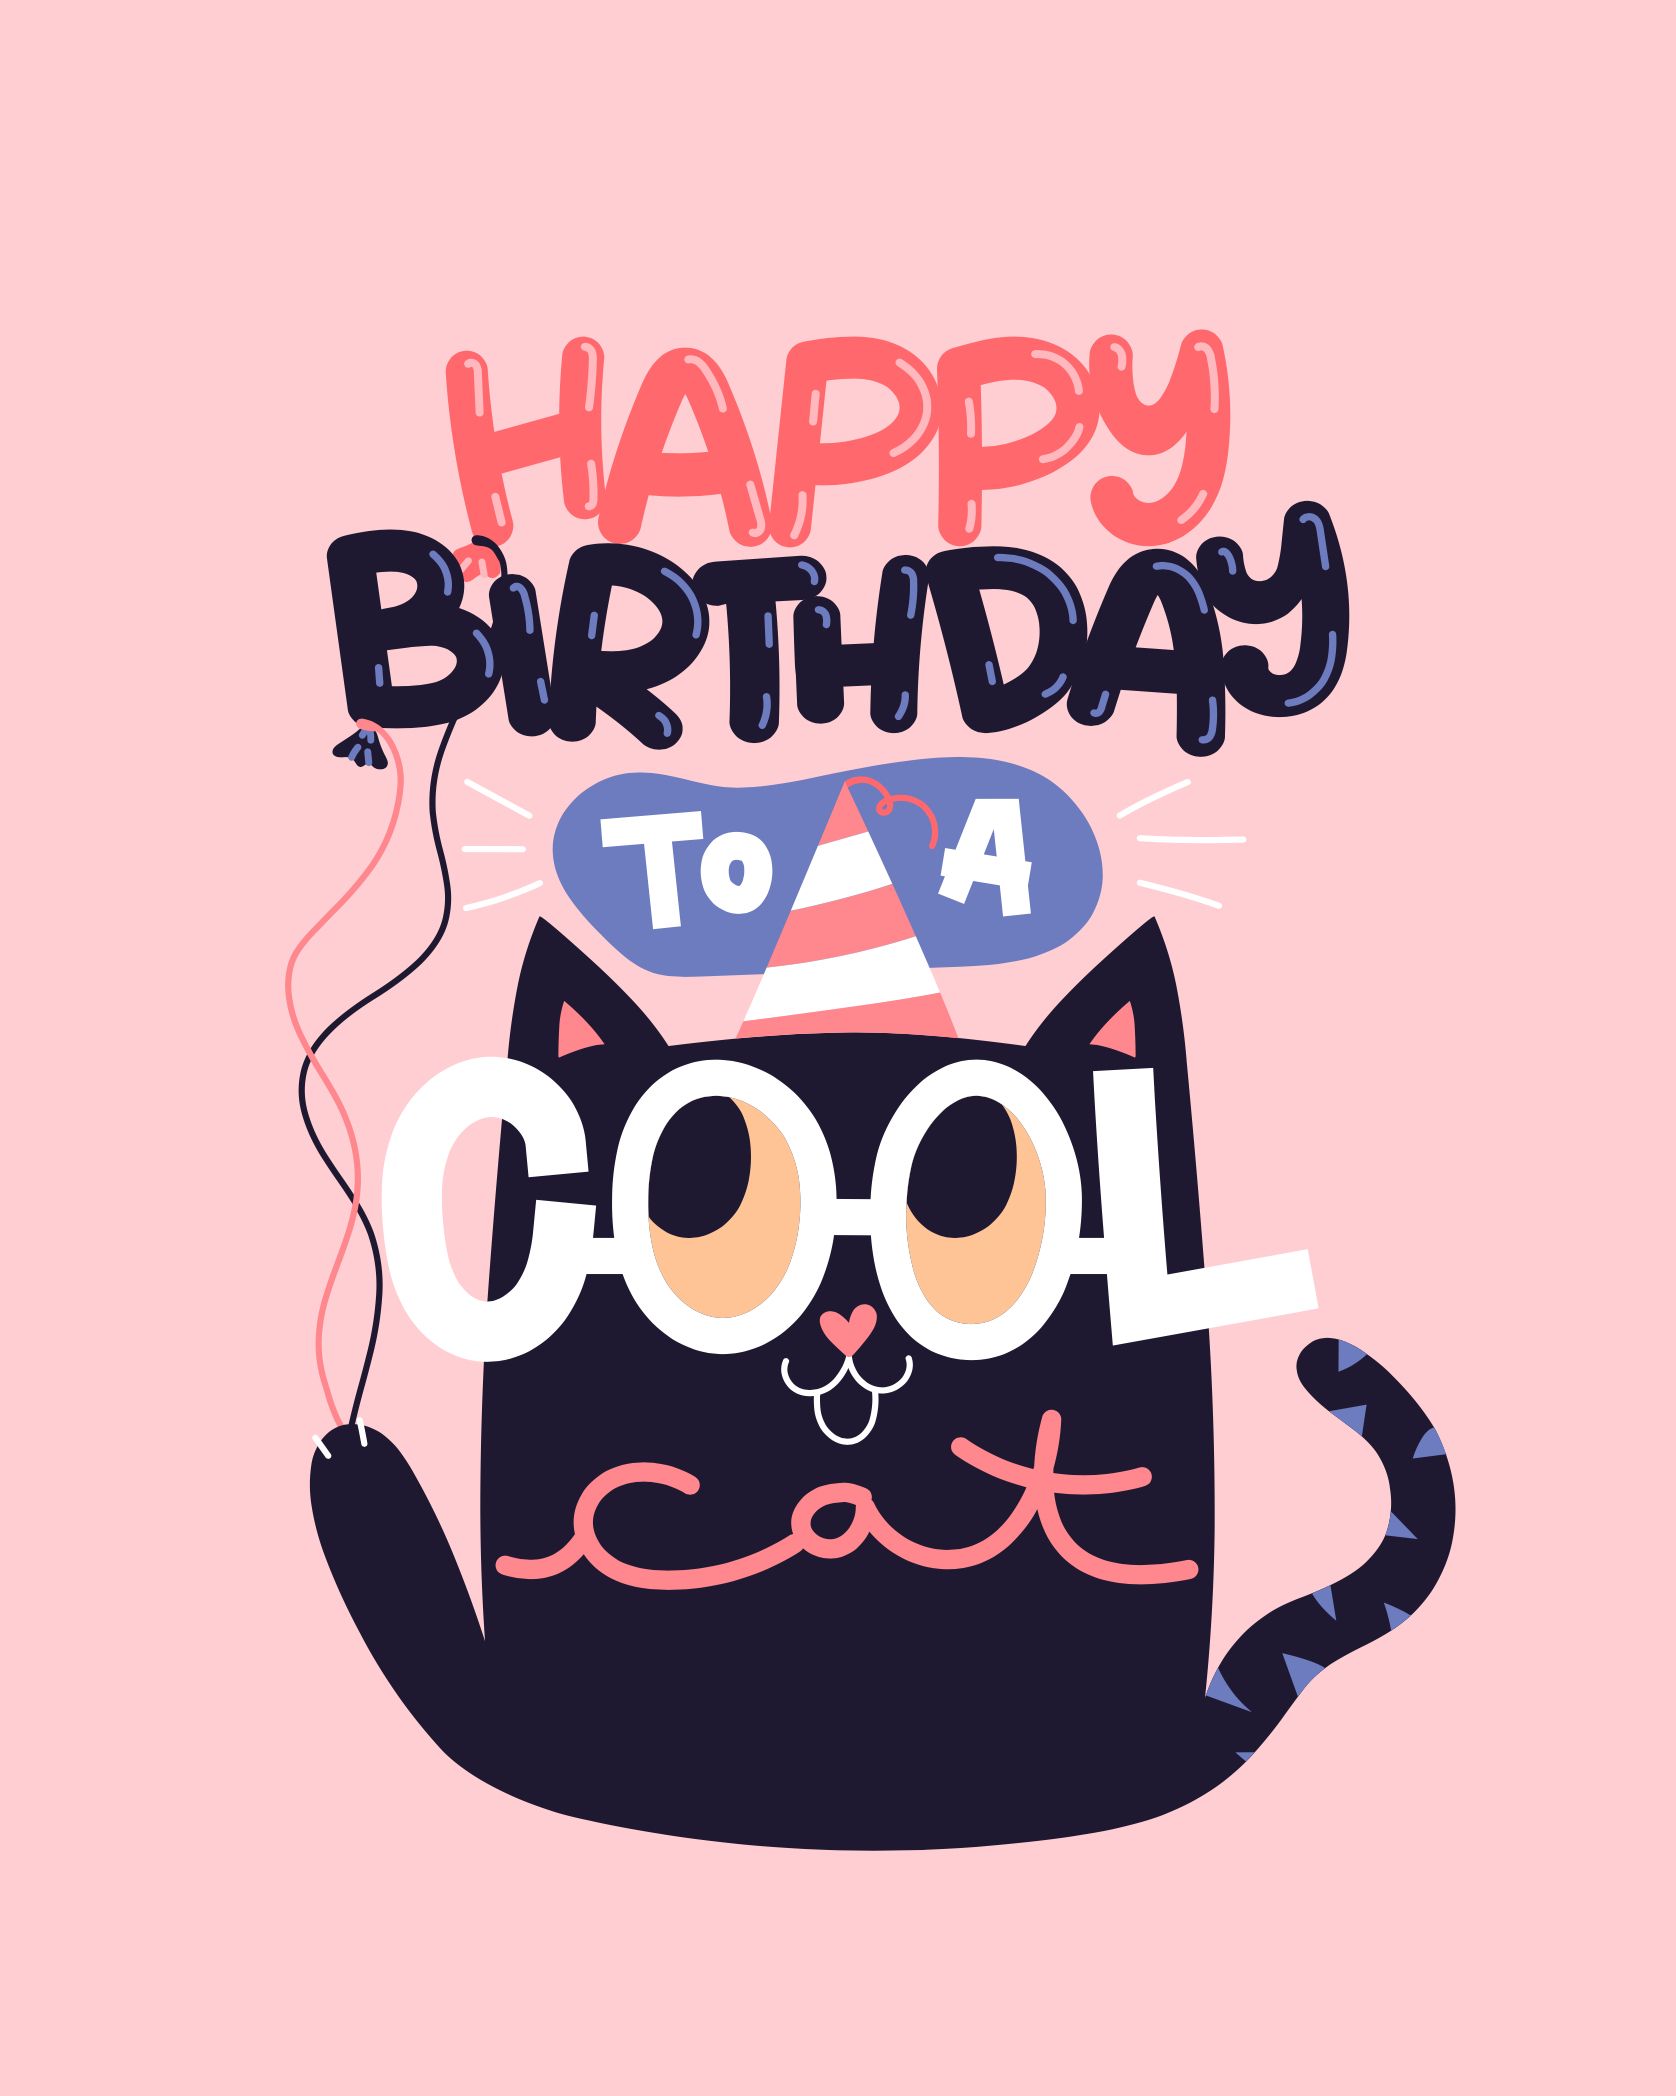 Card design "happy birthday to a cool cat"